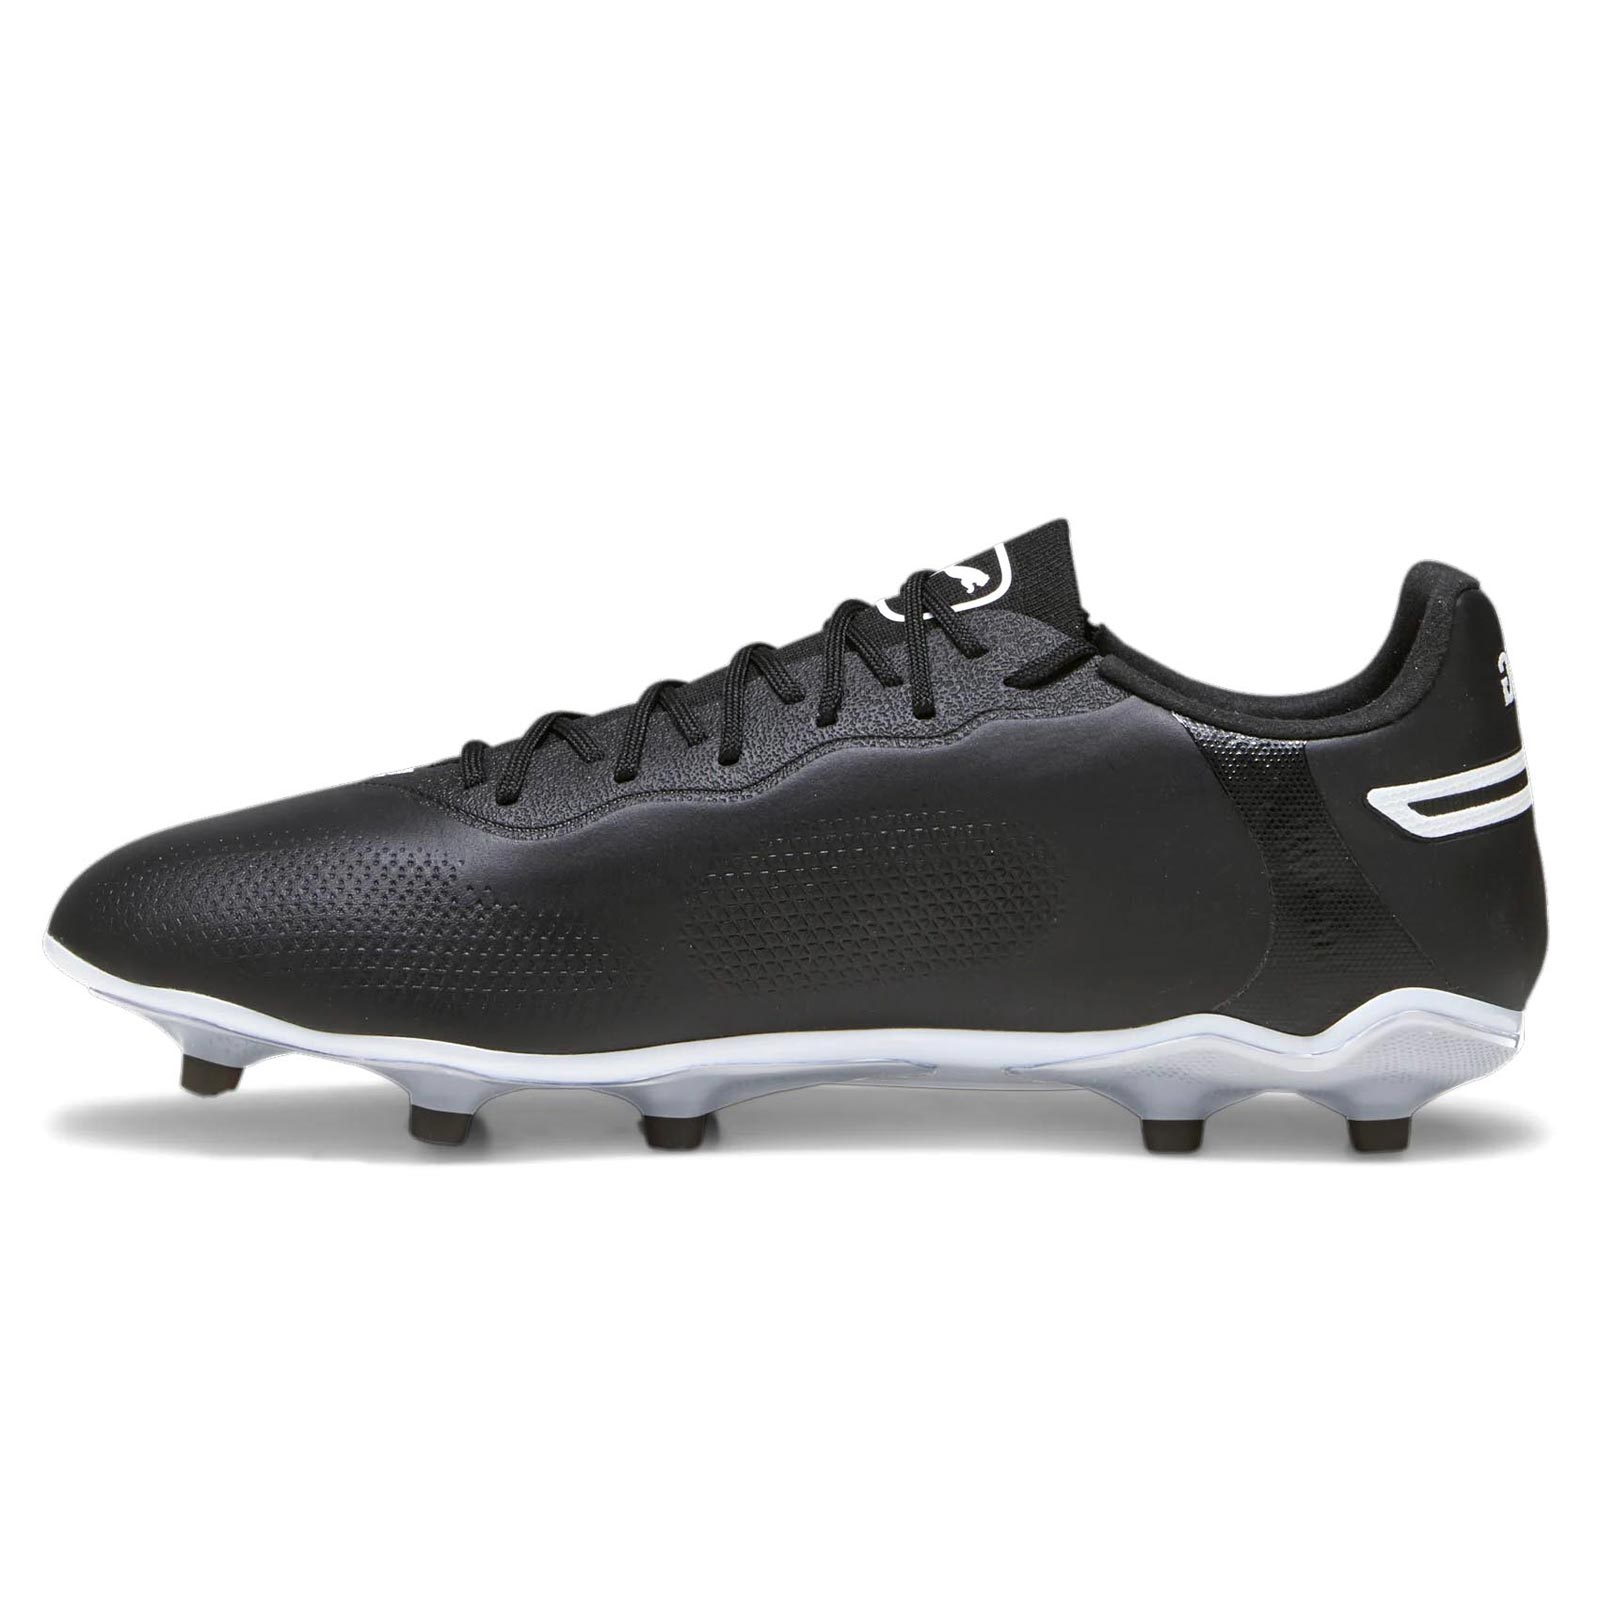 PUMA KING PRO FIRM-GROUND FOOTBALL BOOTS